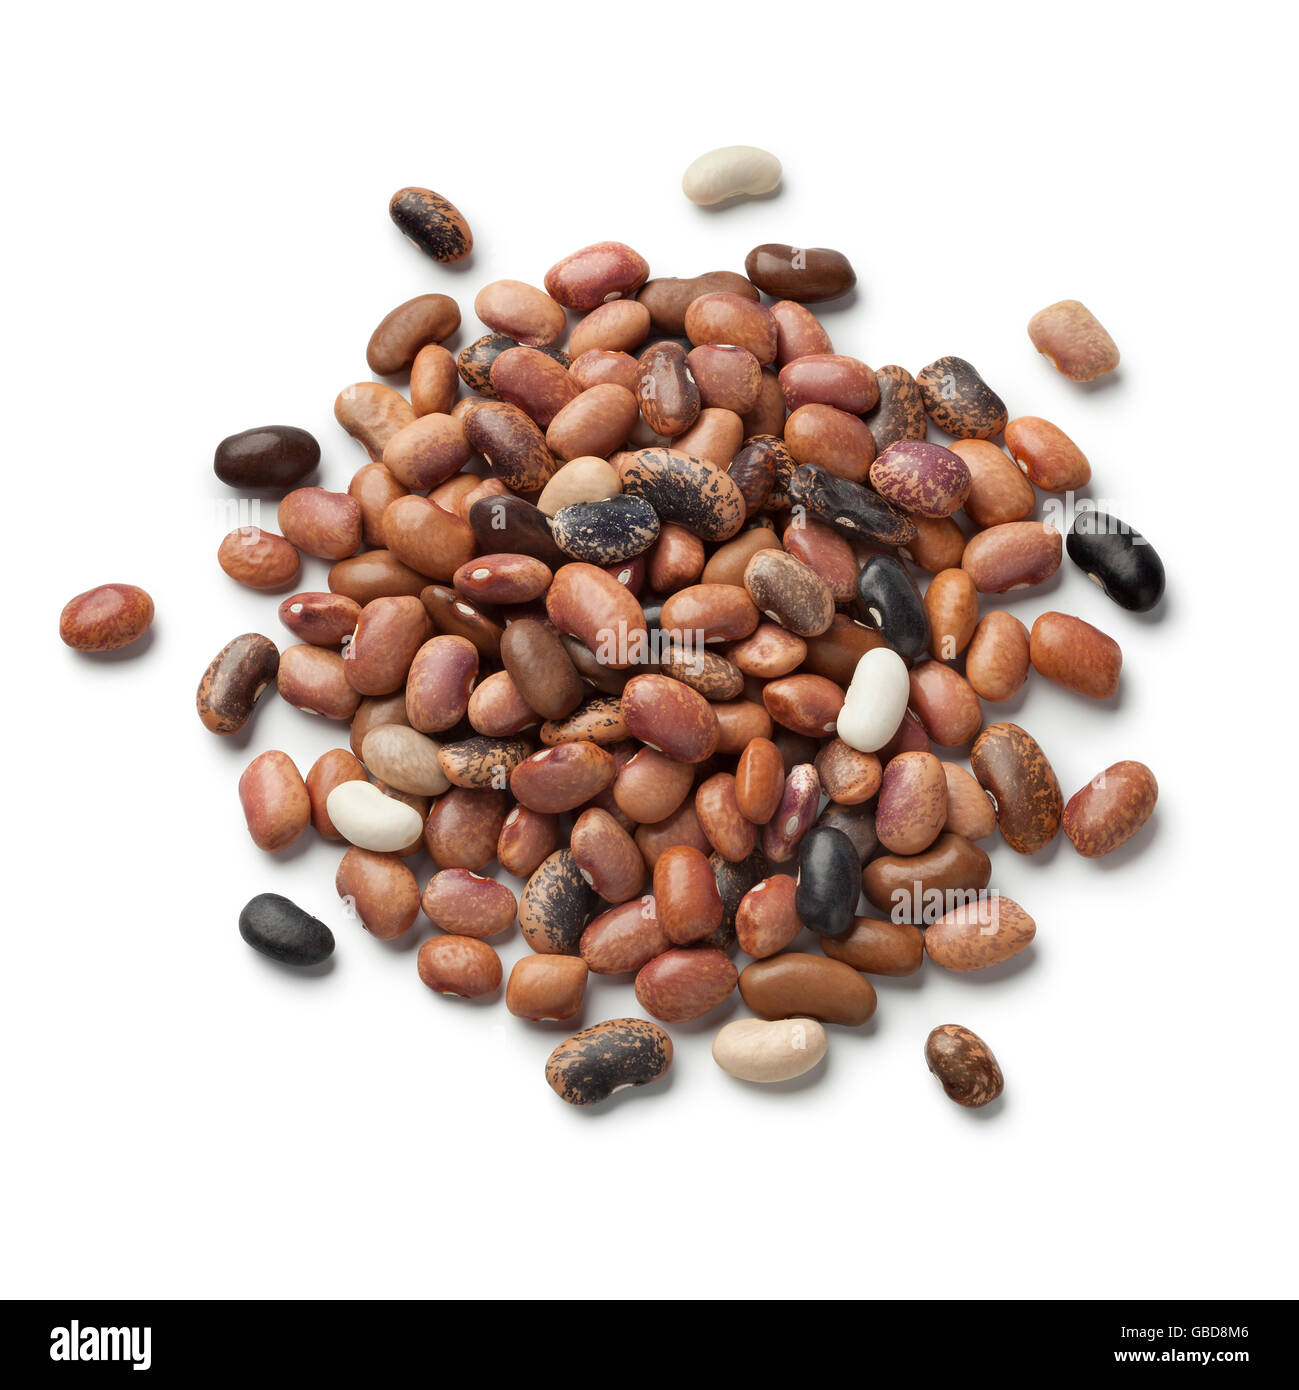 Heap of dried pebble beans on white background Stock Photo